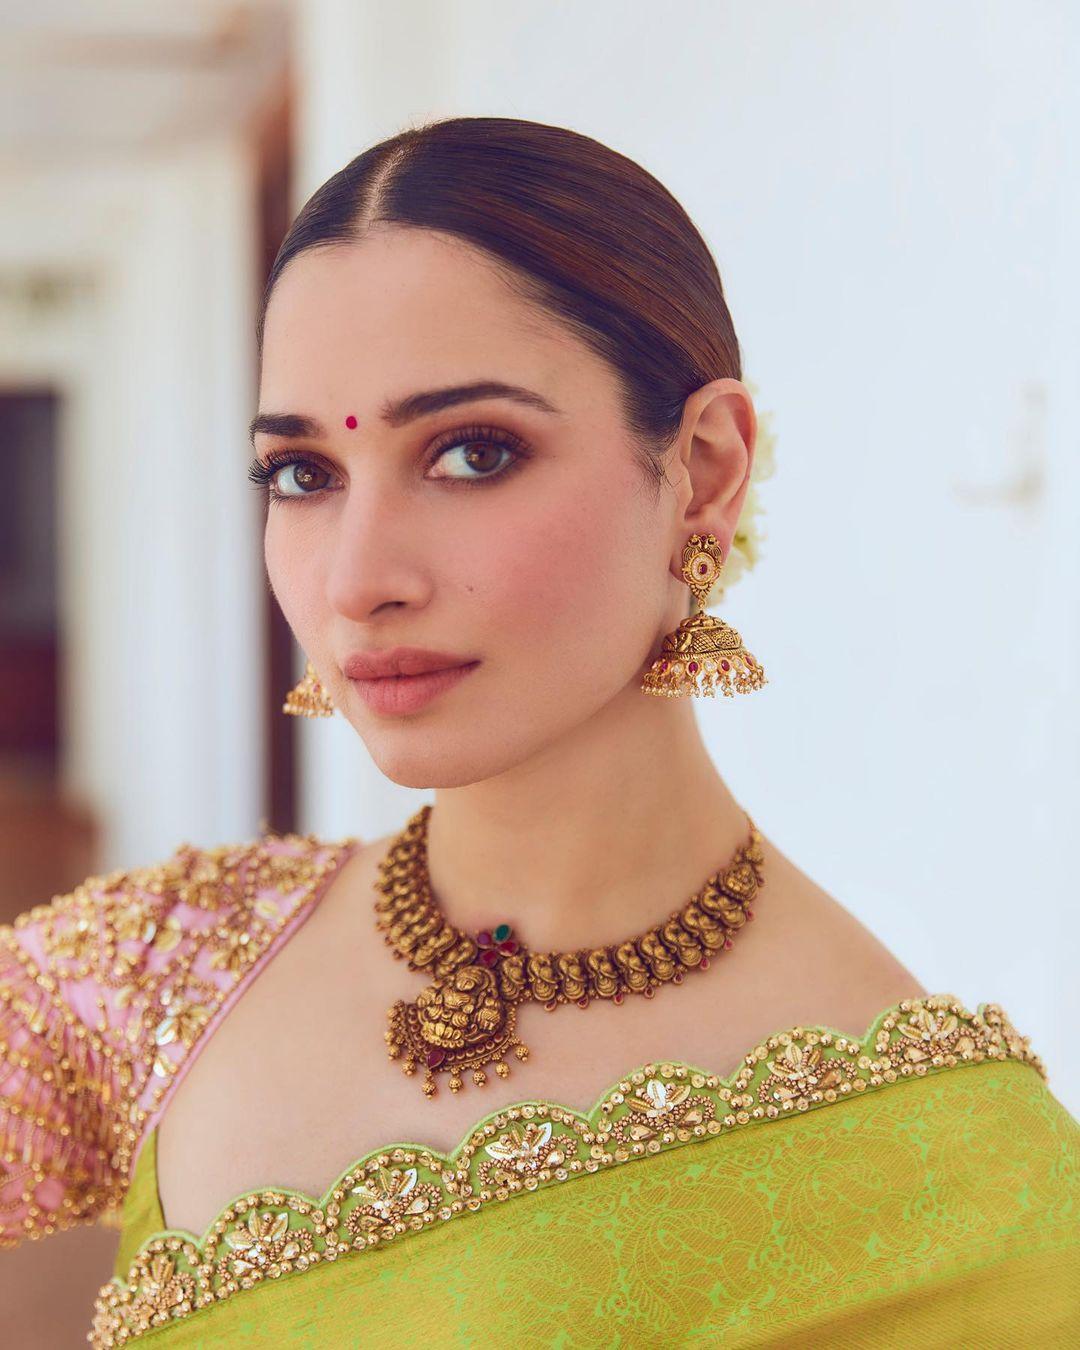 Tamannaah's choice and styling demonstrated her innate ability to seamlessly merge tradition with modernity, creating a look that resonated with elegance and sophistication.